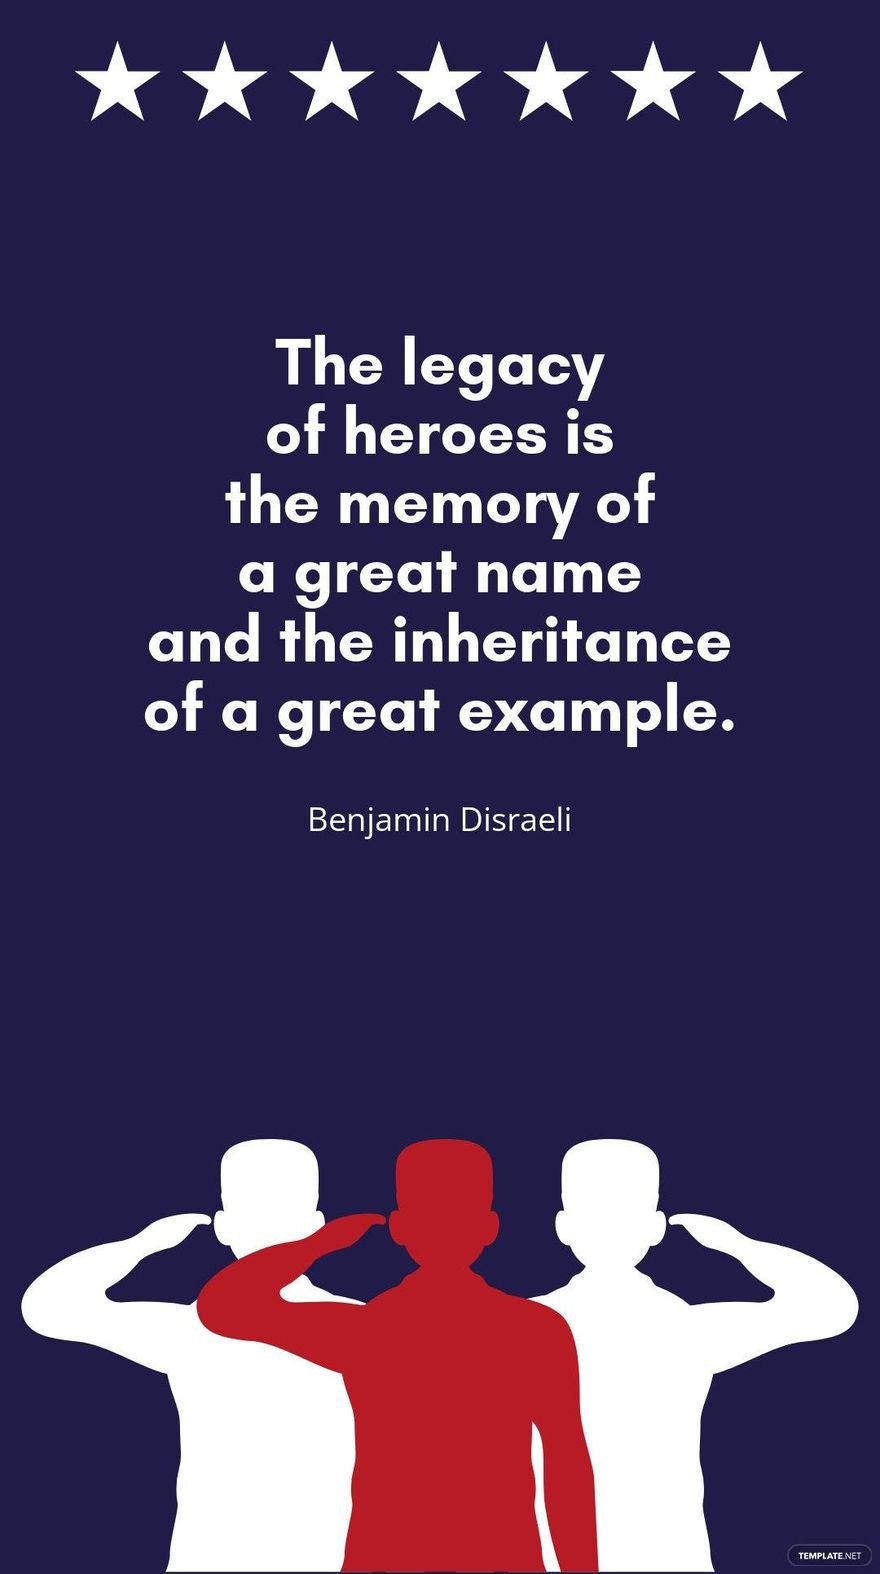 Benjamin Disraeli - “The legacy of heroes is the memory of a great name and the inheritance of a great example.”